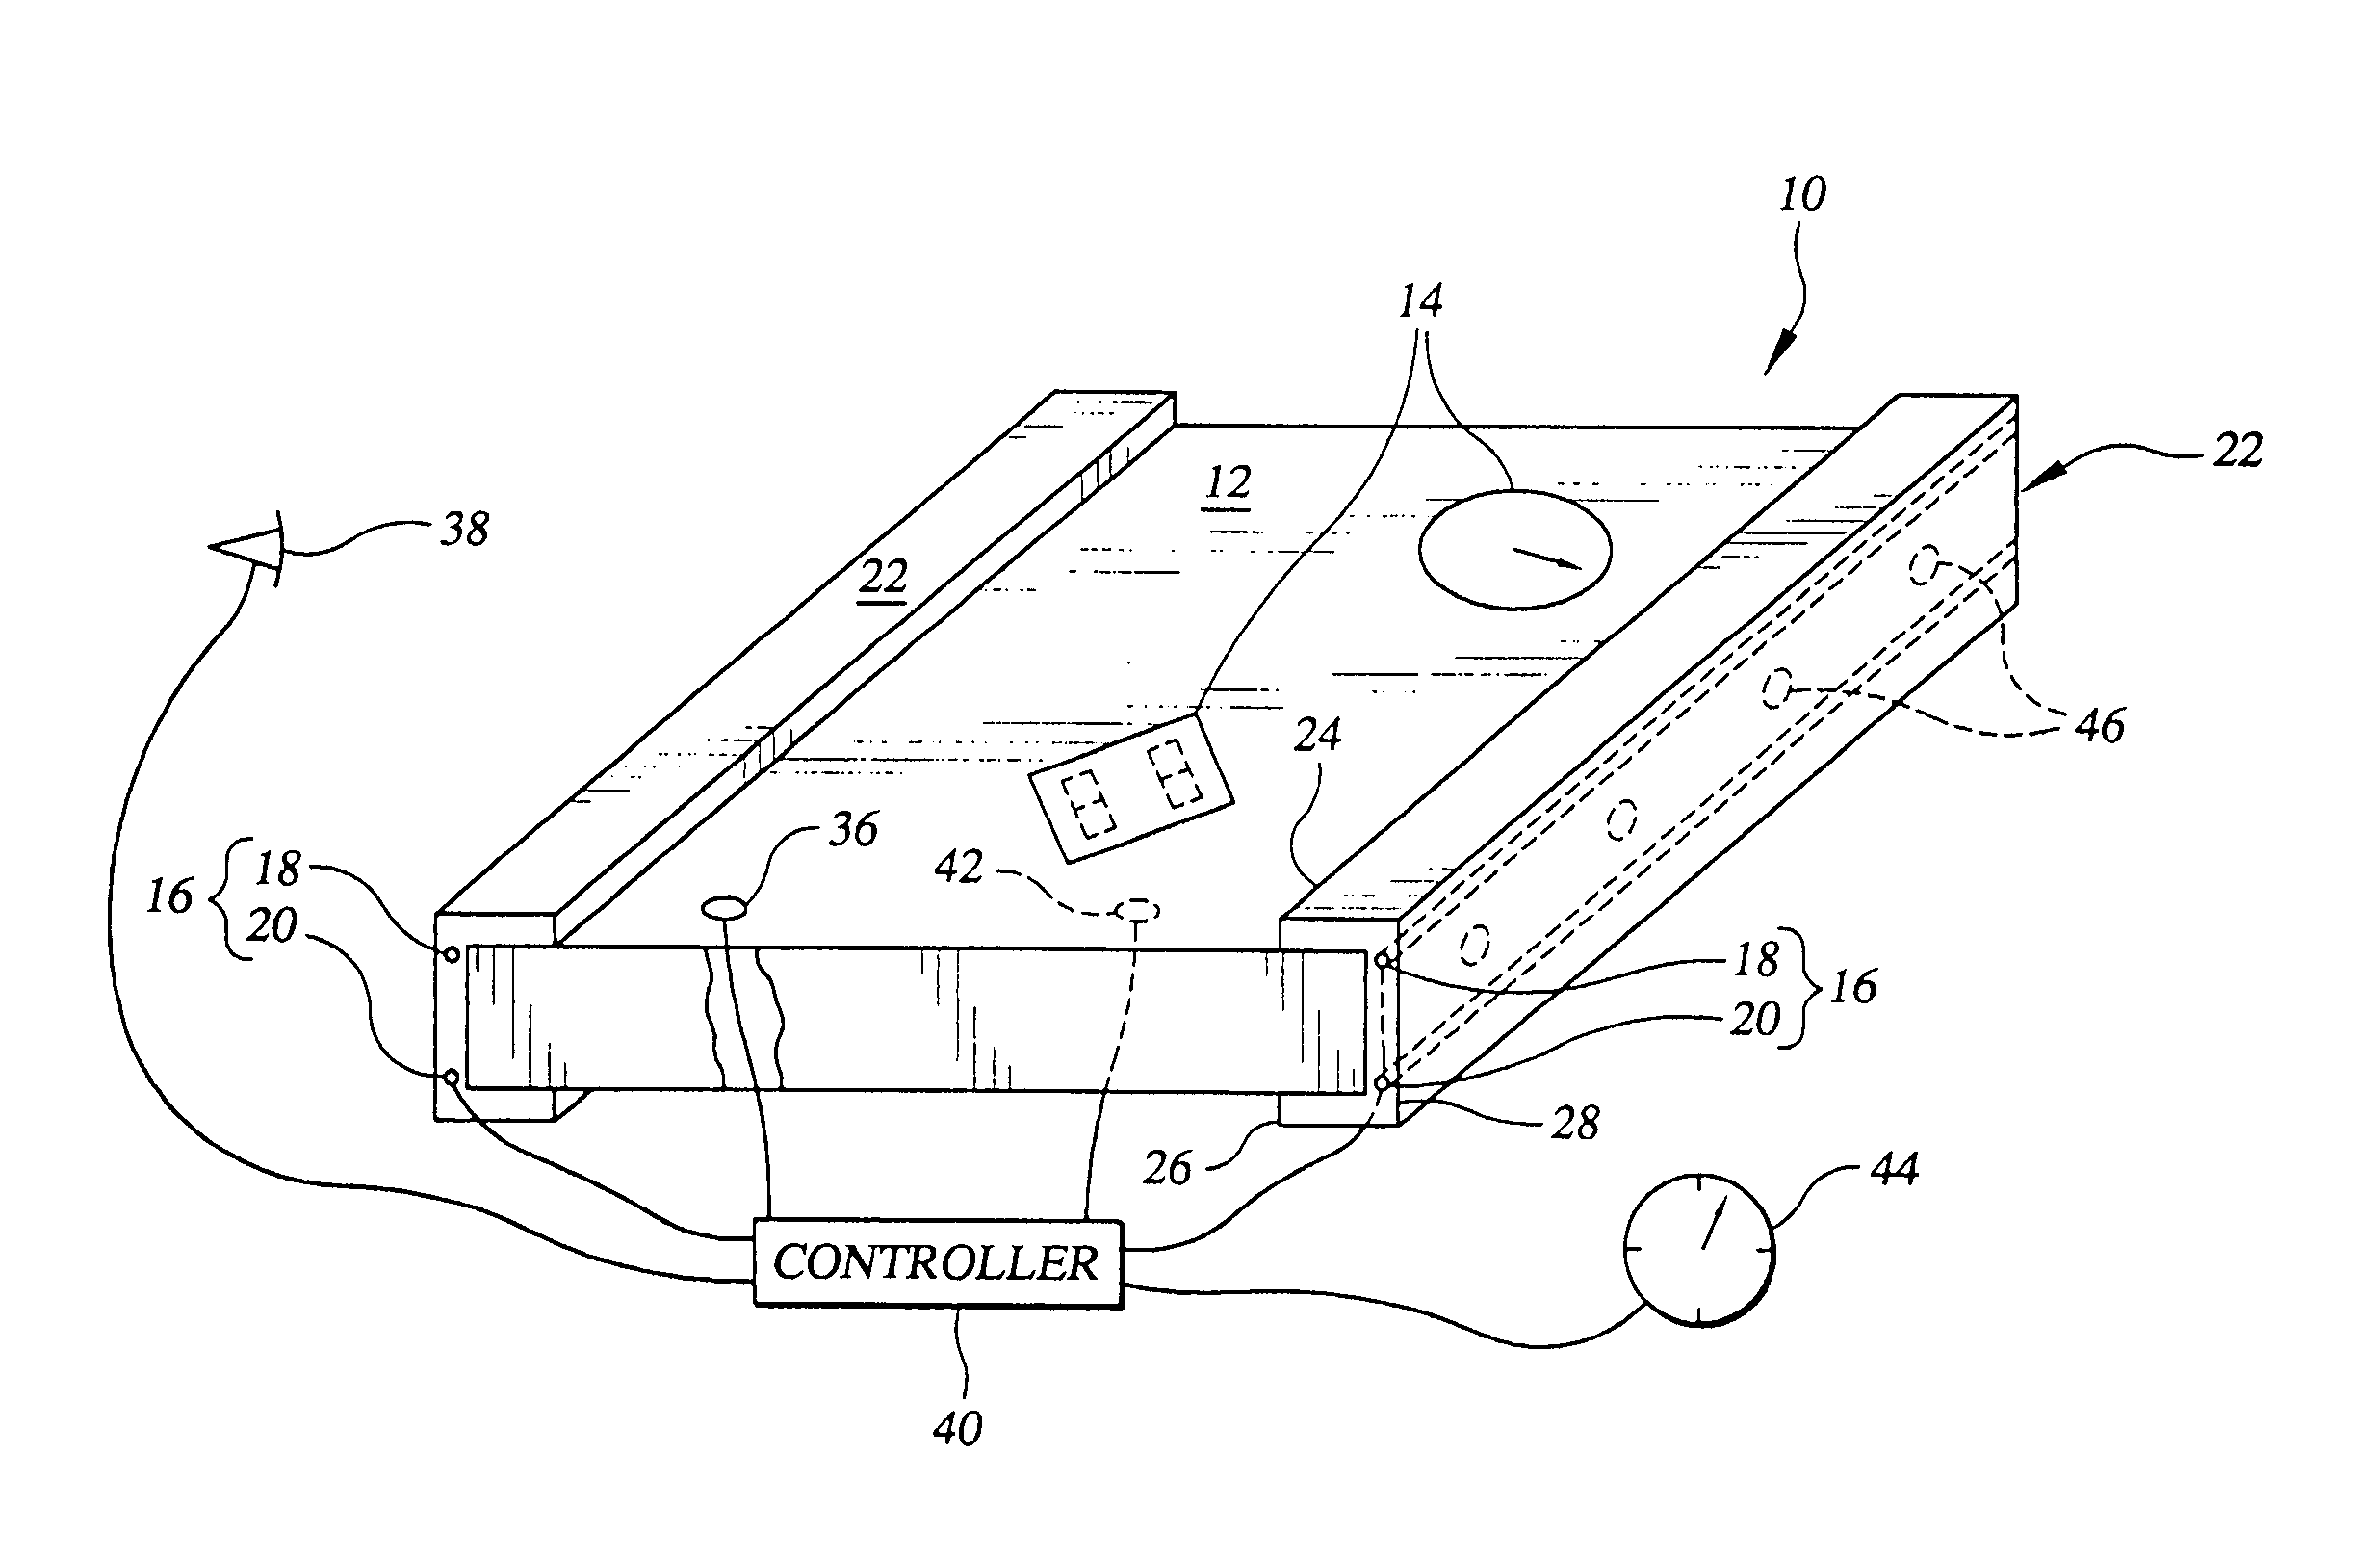 Method and apparatus for illuminating a flat panel display with a variably-adjustable backlight